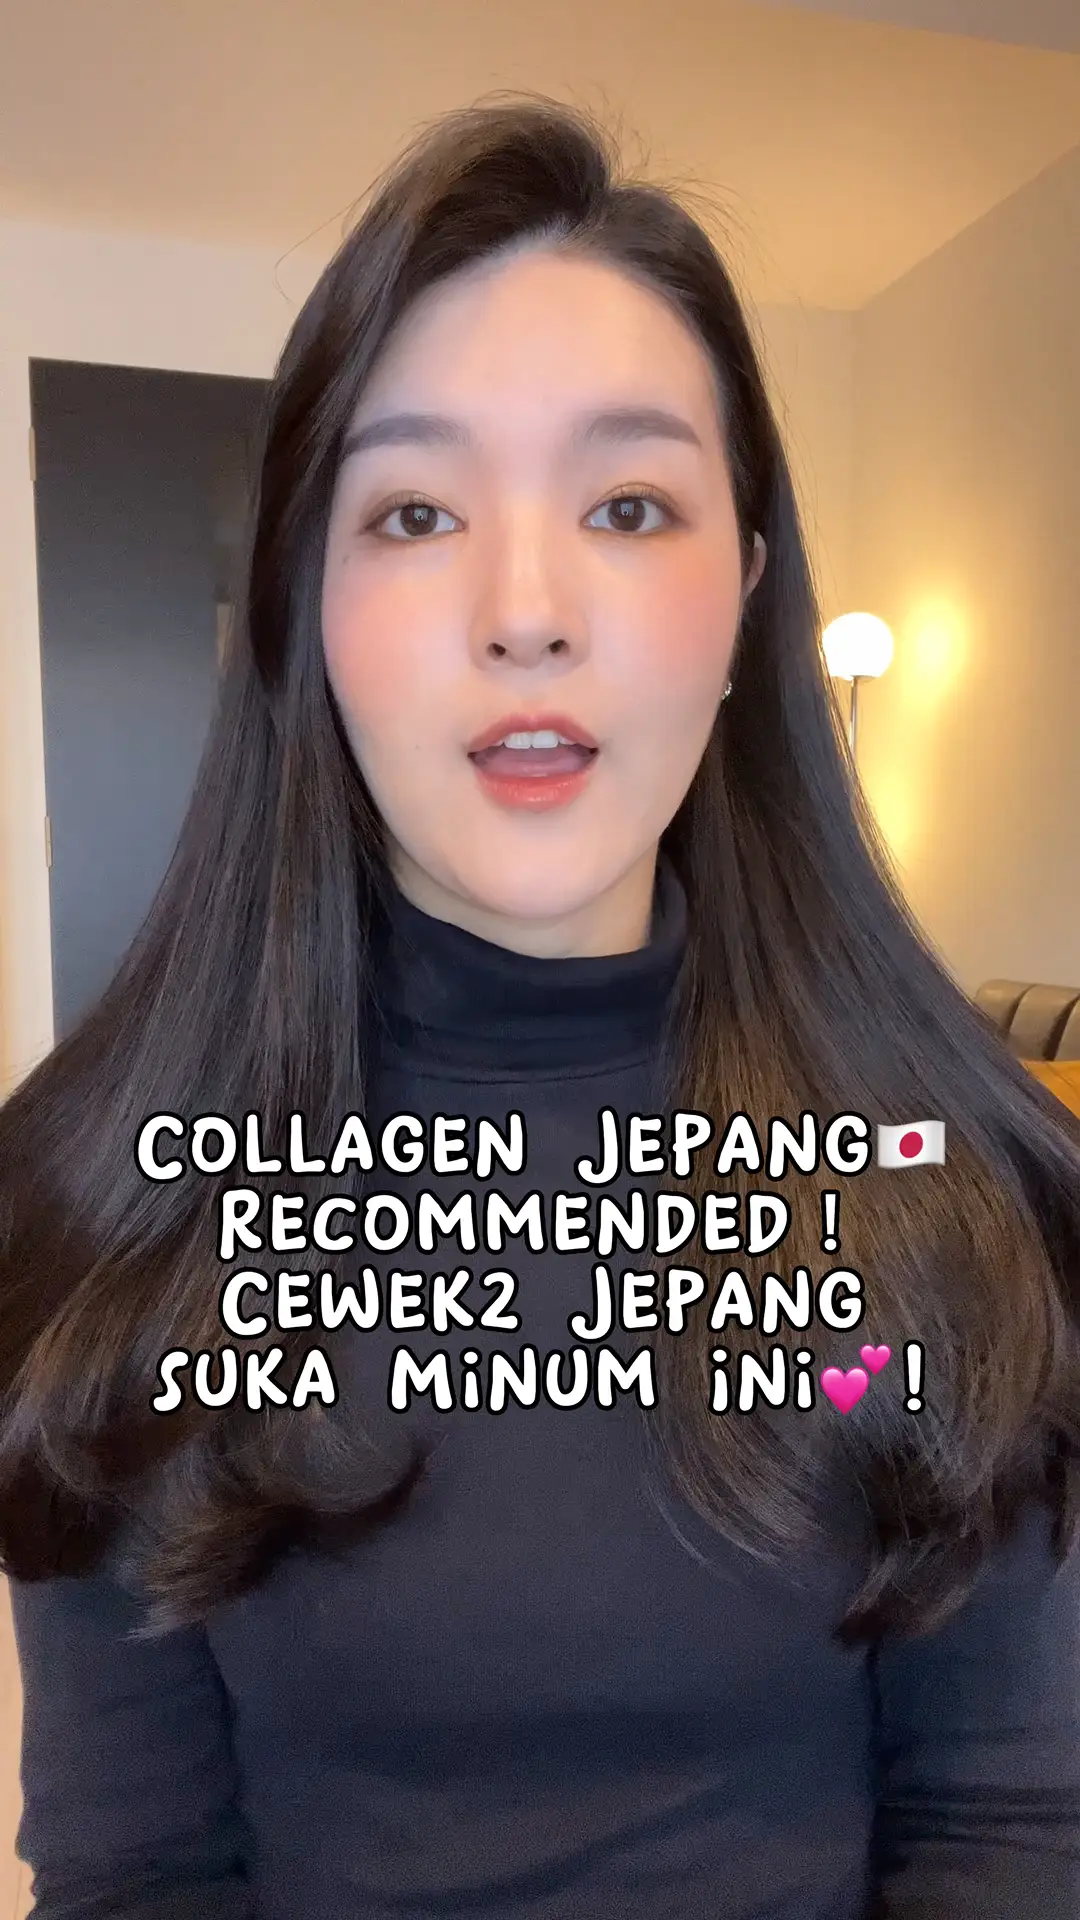 Collagen Jepang🇯🇵 recommended! 's images